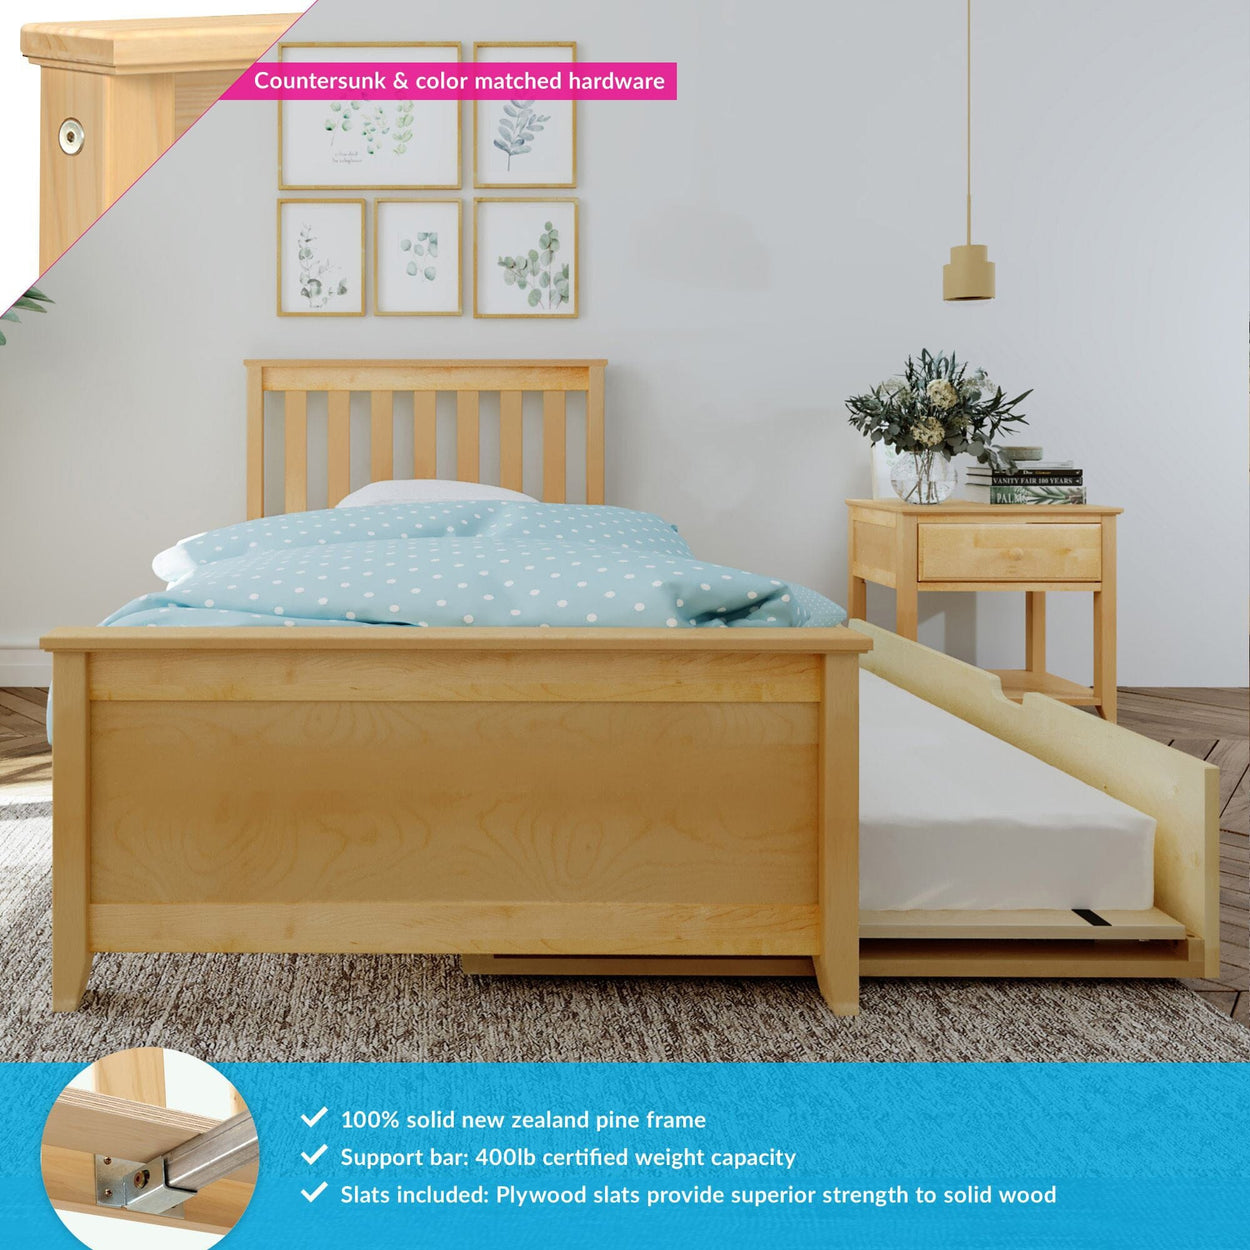 z186210-001 : Kids Beds Twin-Size Bed with Trundle, Natural